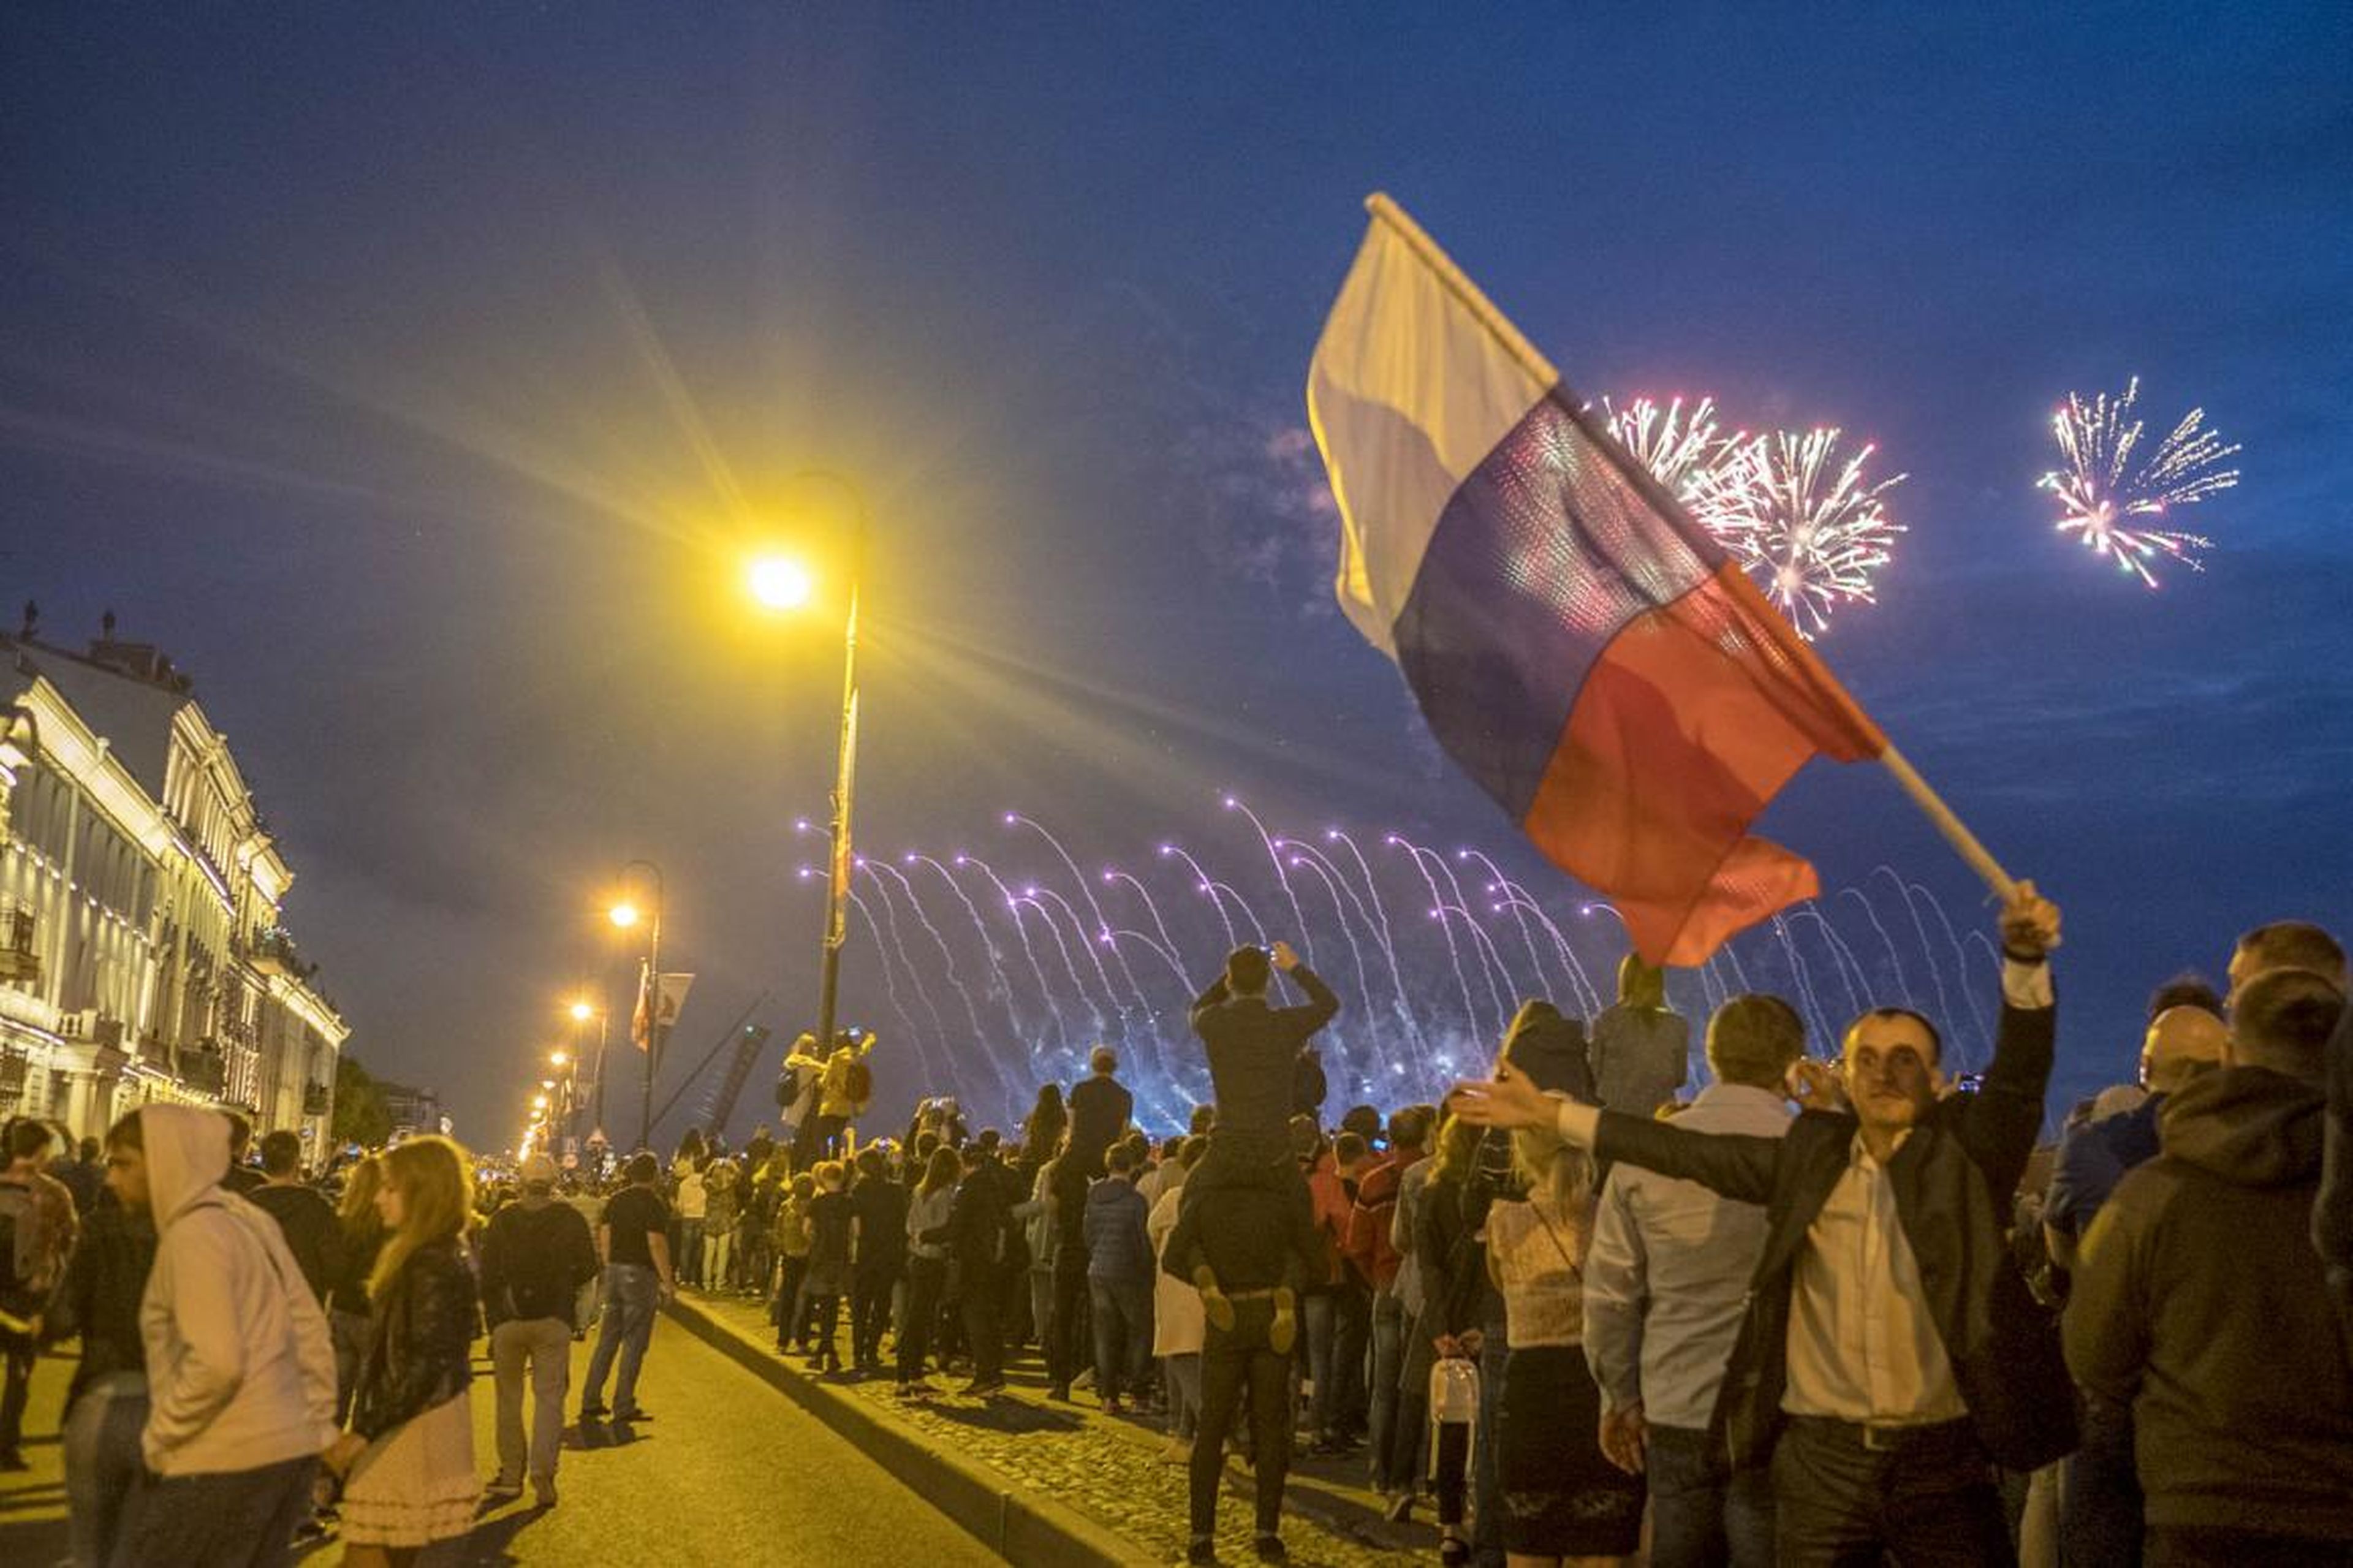 The White Nights peak with the Scarlet Sails festival. It's the biggest night of the year in St. Petersburg. Everyone comes out to the banks of the Neva River to watch a grand display of fireworks, a water show, music, and the